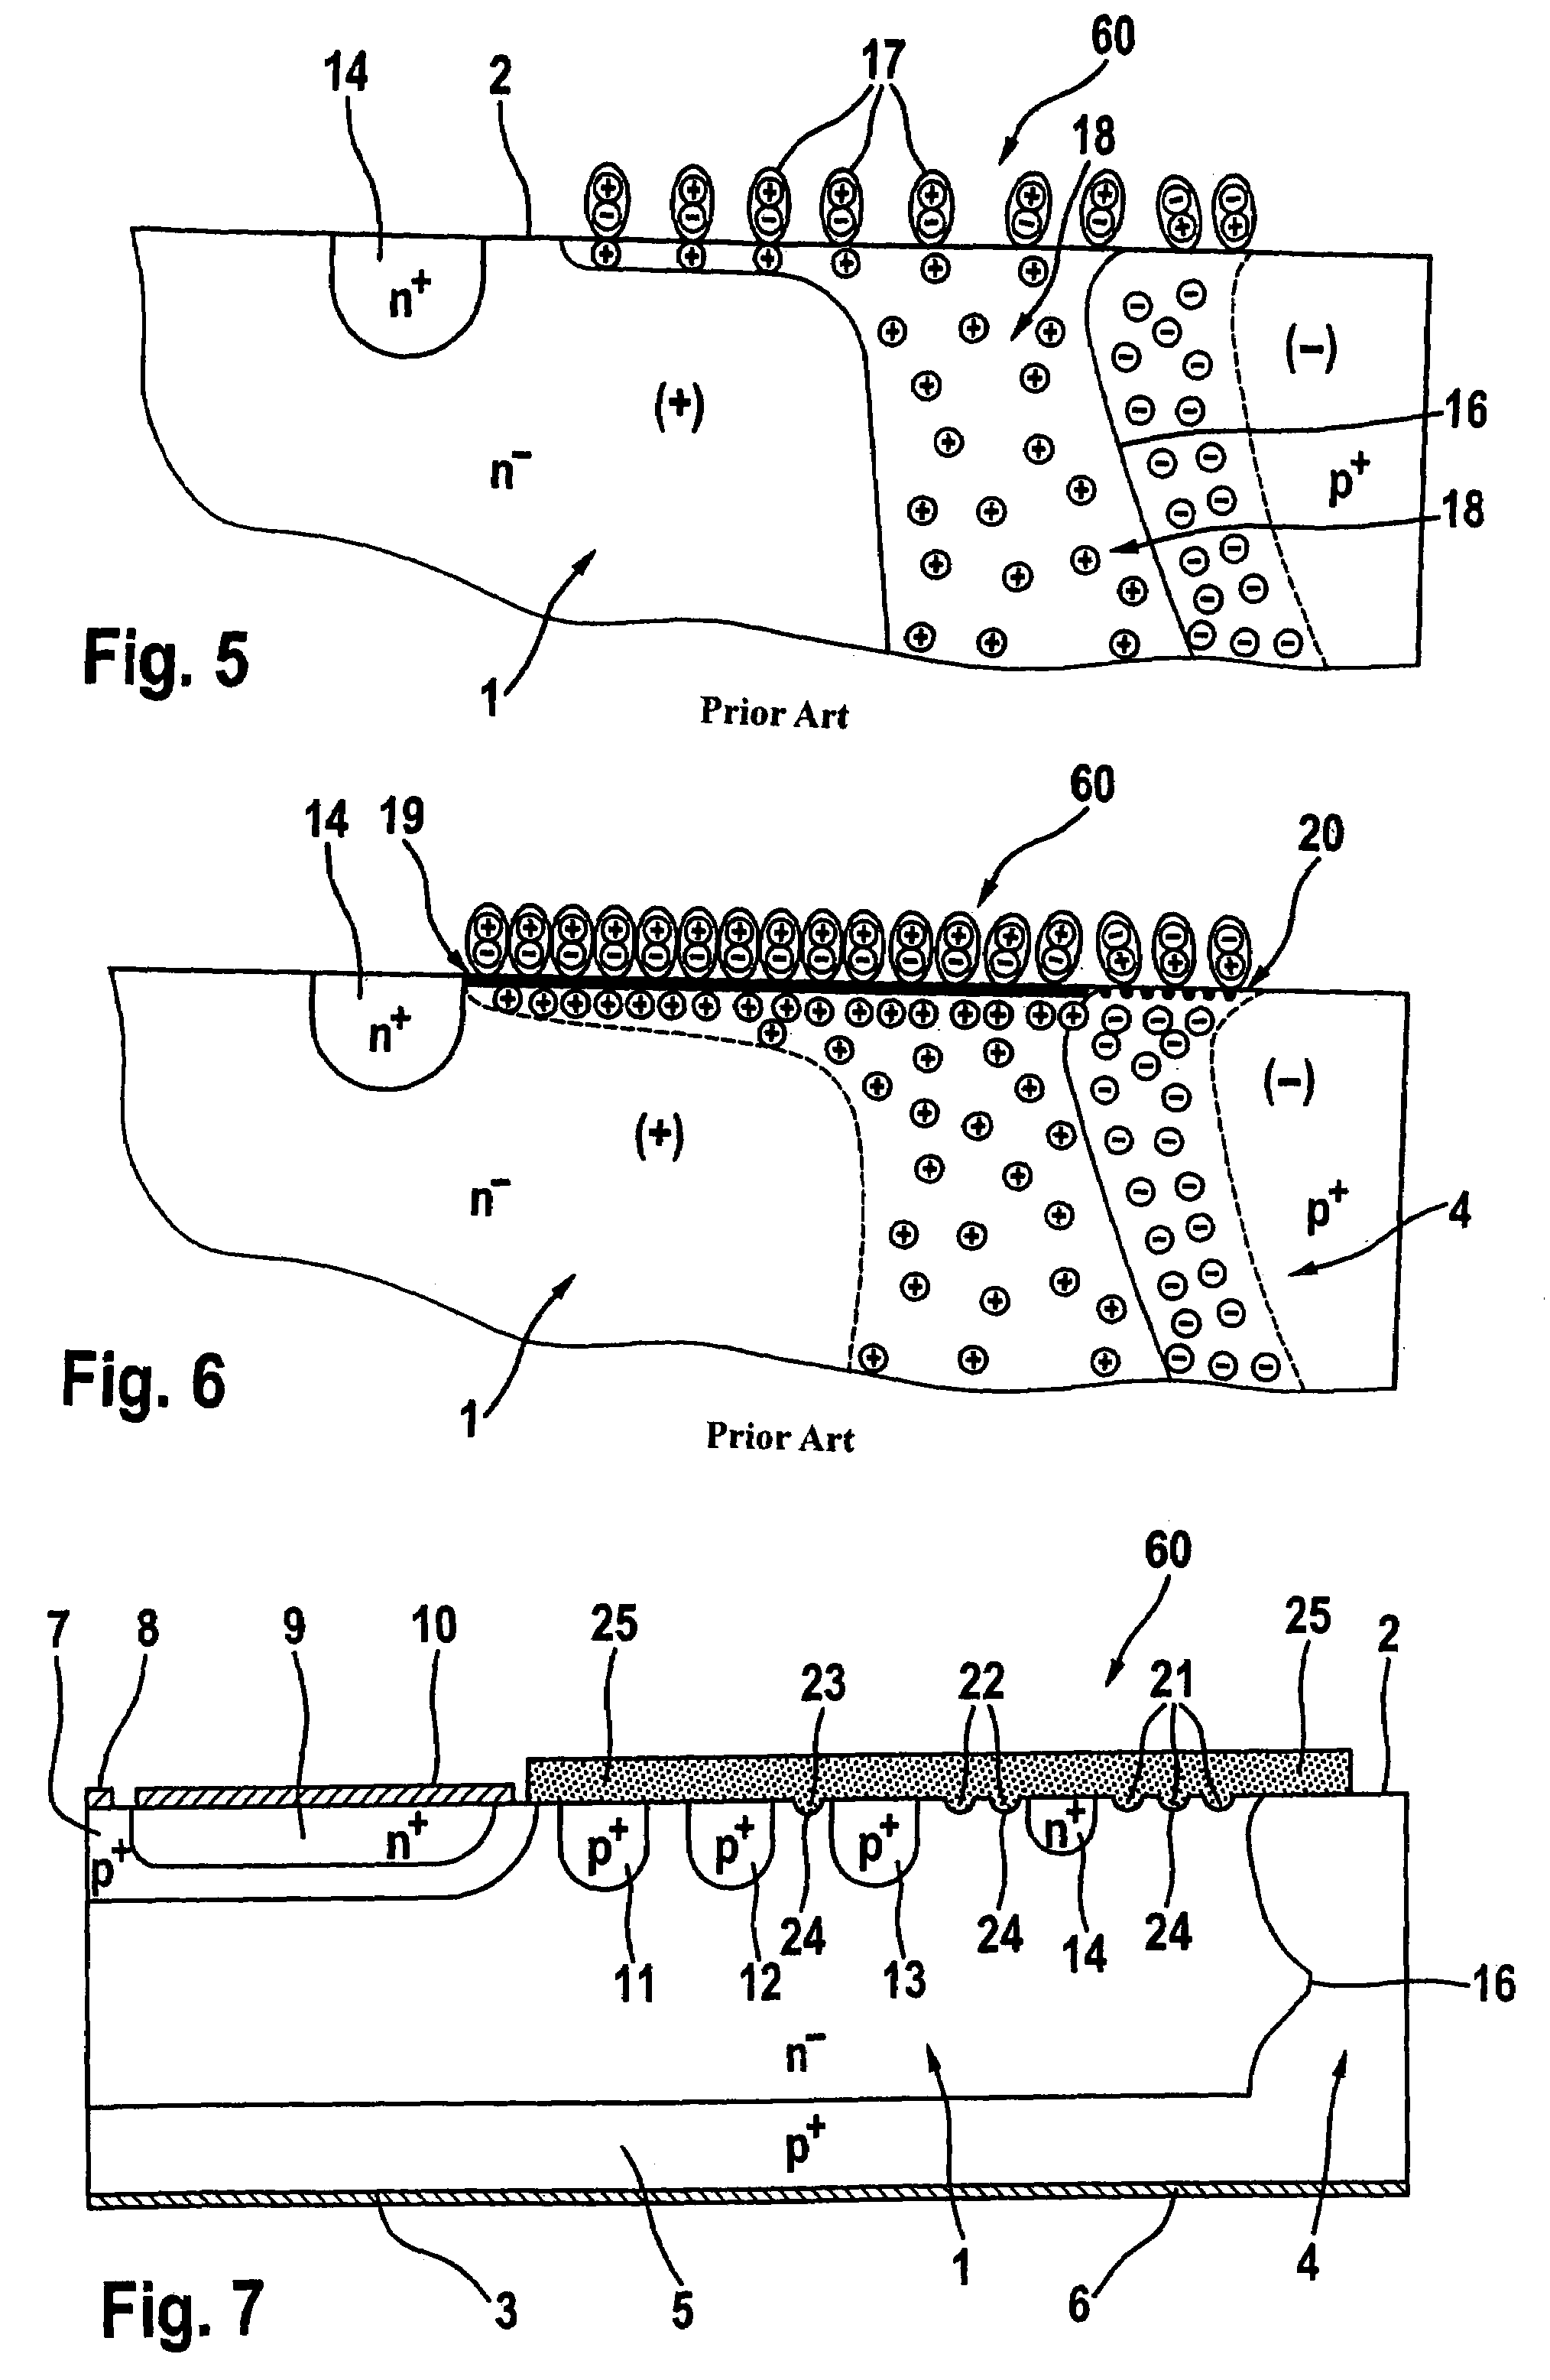 Power semiconductor component in the planar technique